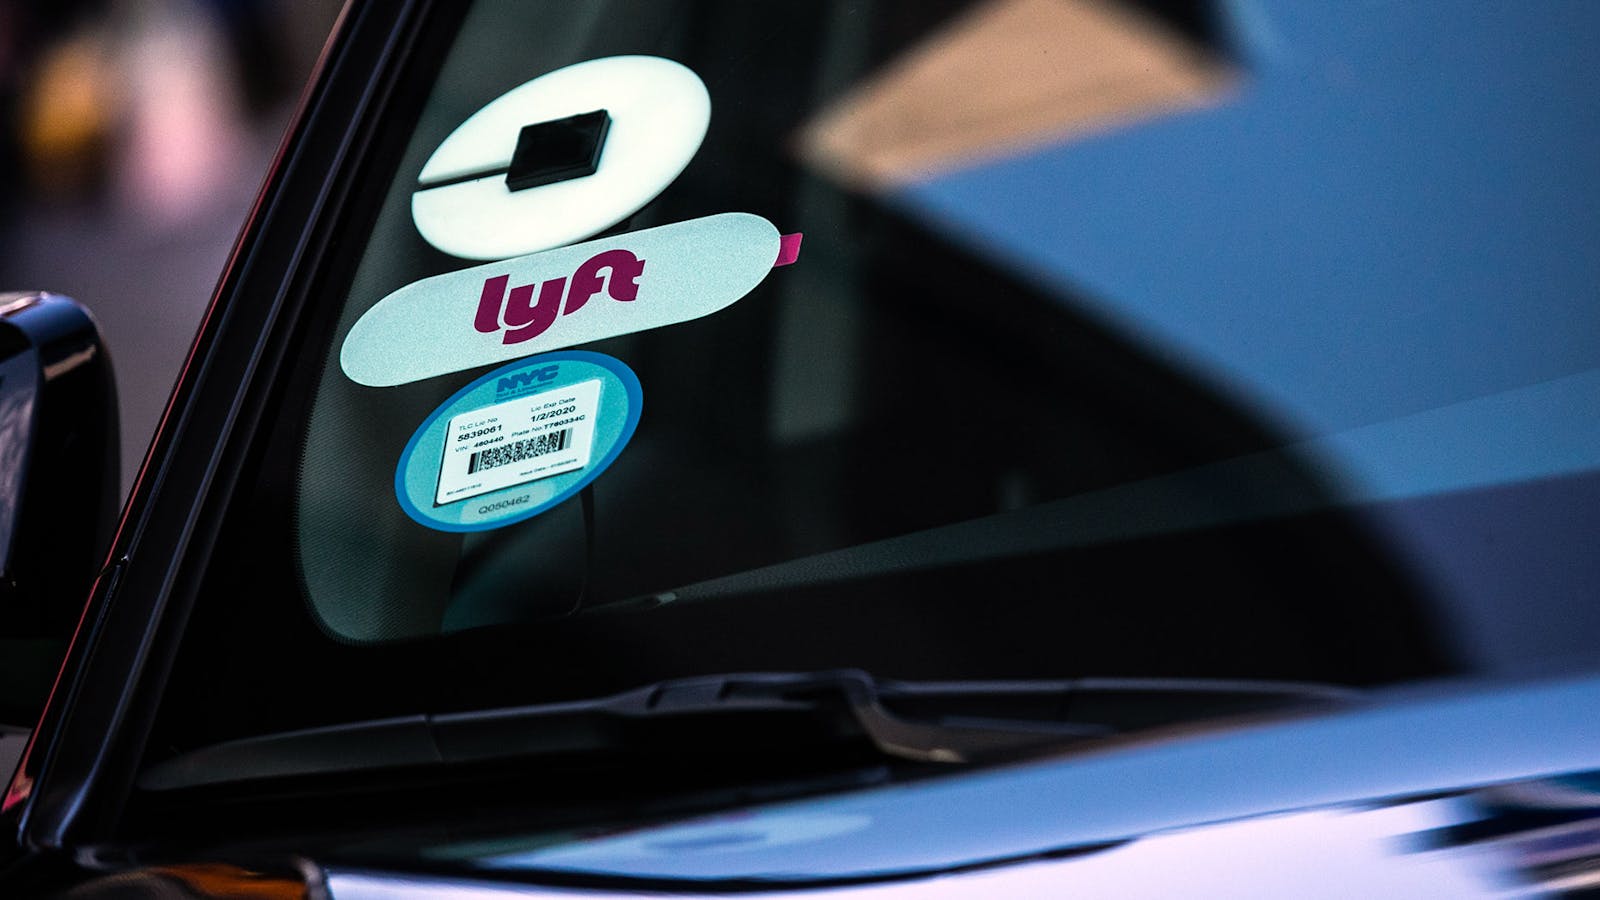 Uber and Lyft stickers are displayed on a vehicle in New York. Photo by Bloomberg.